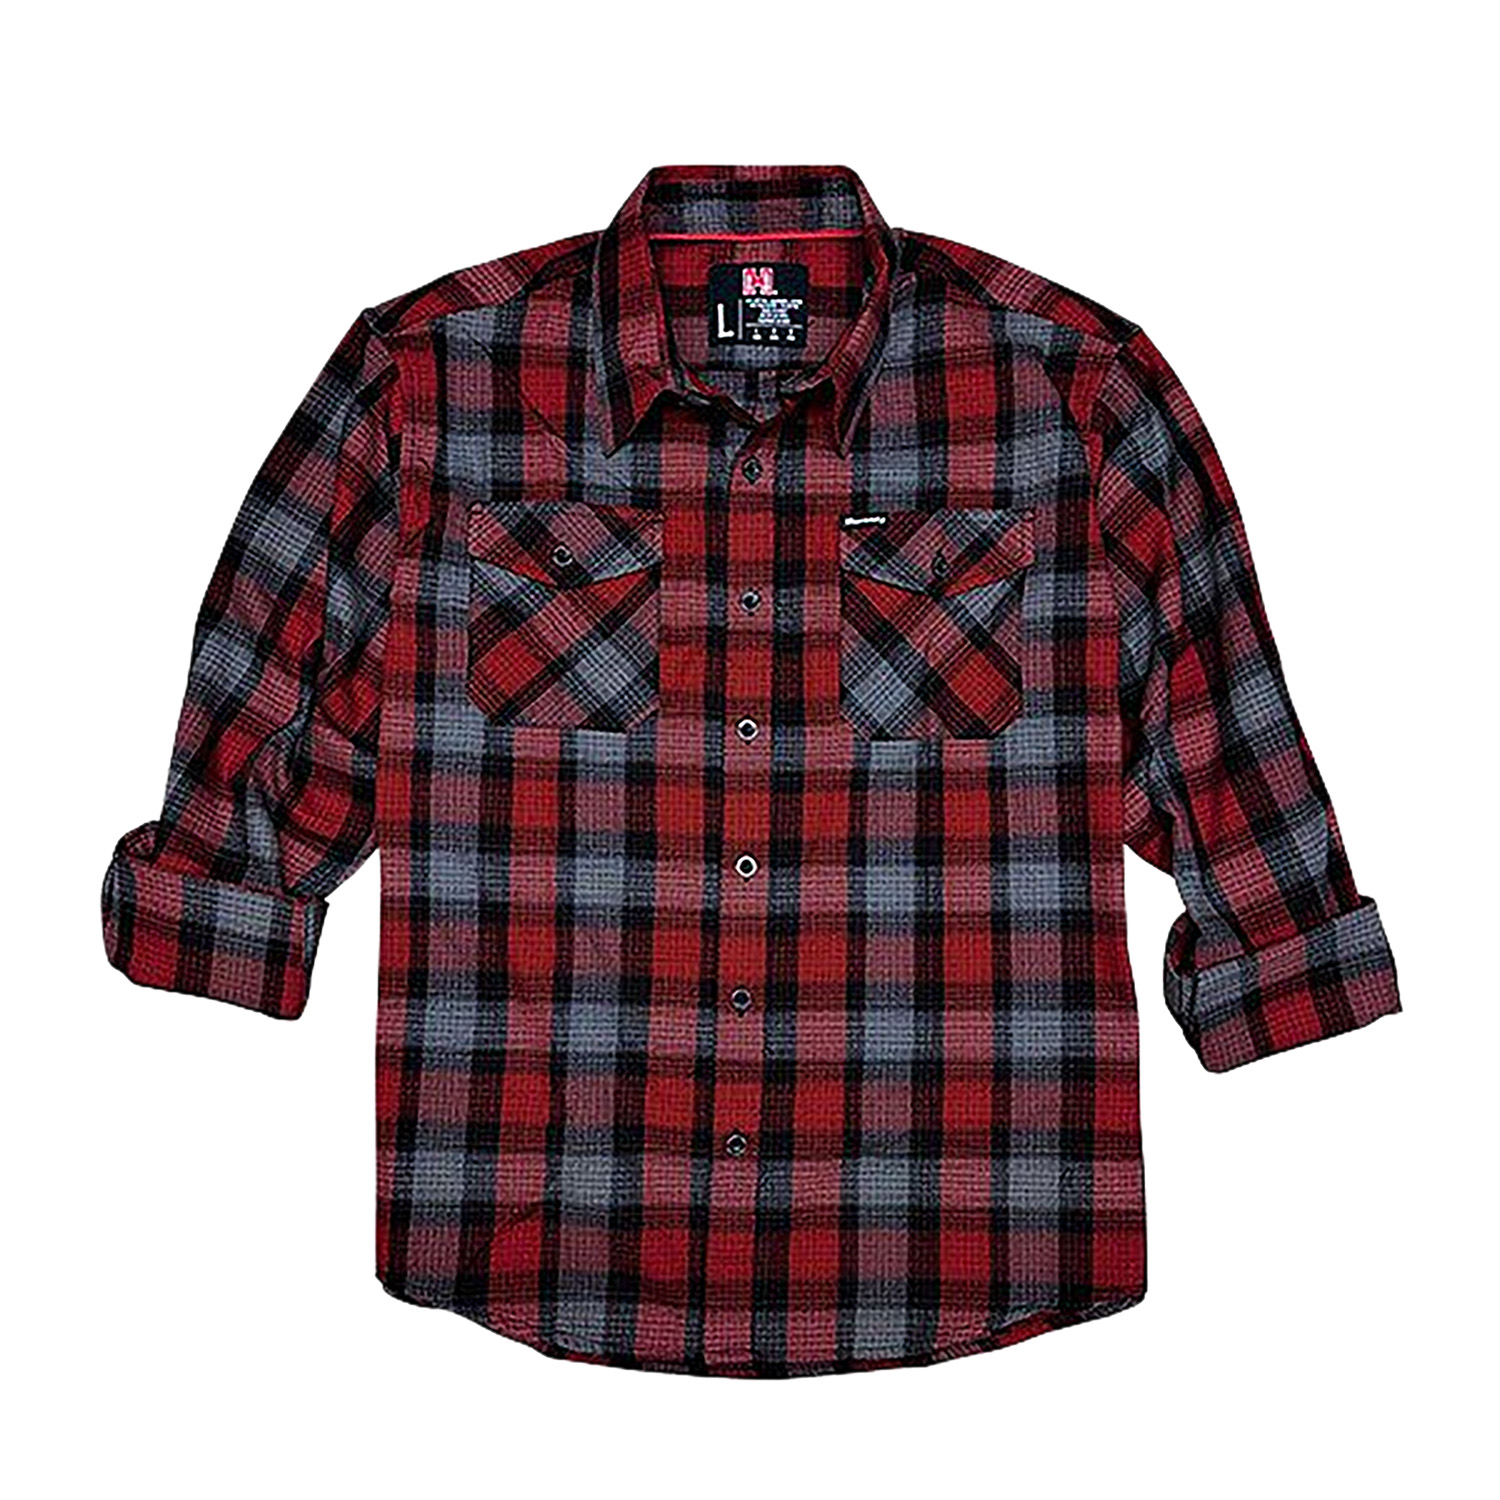 Hornady Gear 32194 Flannel Shirt Xl Red/Black/Gray, Cotton/Polyester, Relaxed Fit Button Up